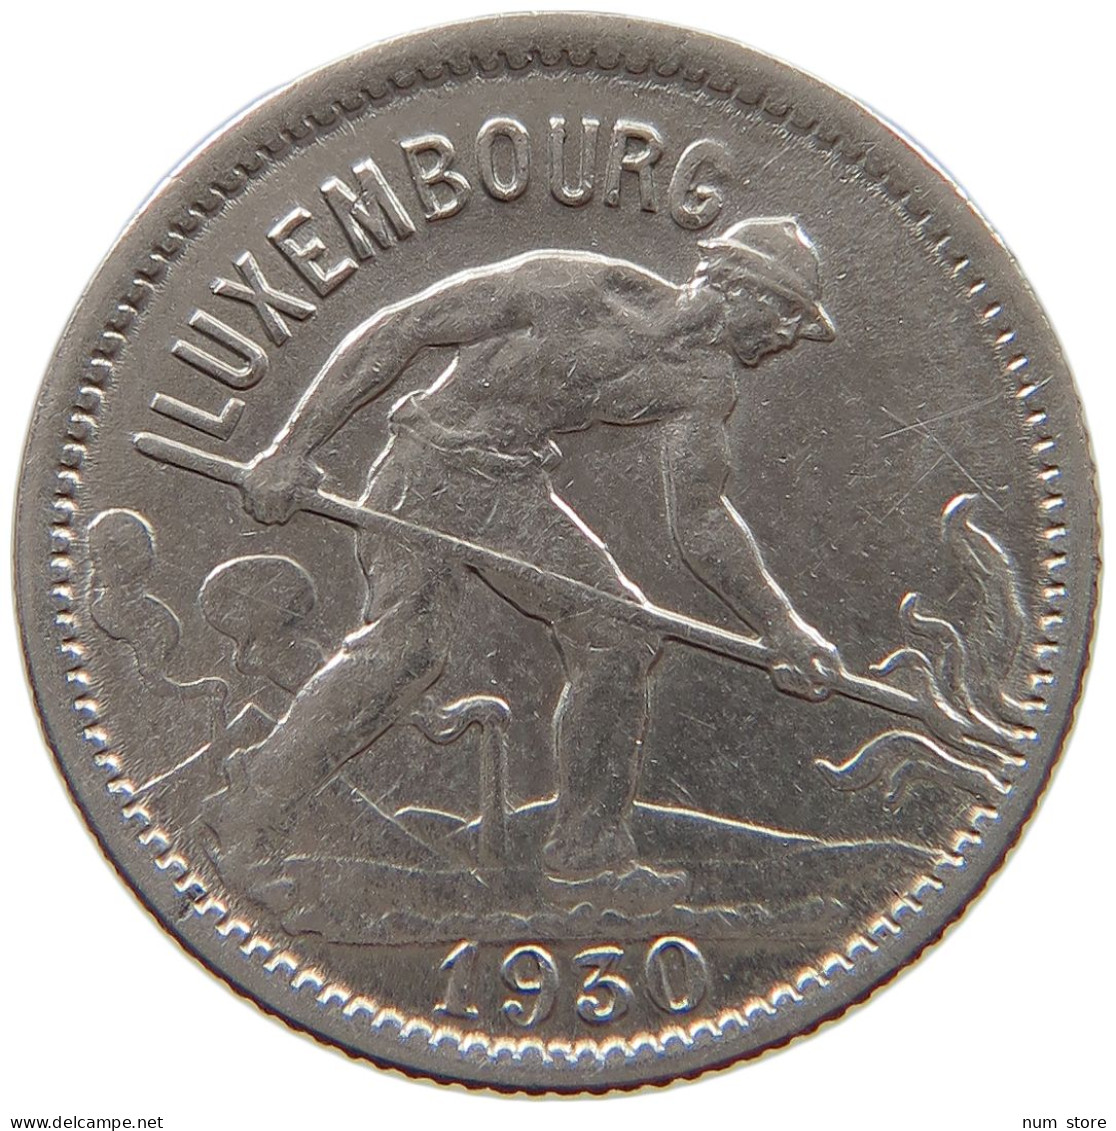 LUXEMBOURG 50 CENTIMES 1930 #c053 0259 - Luxembourg